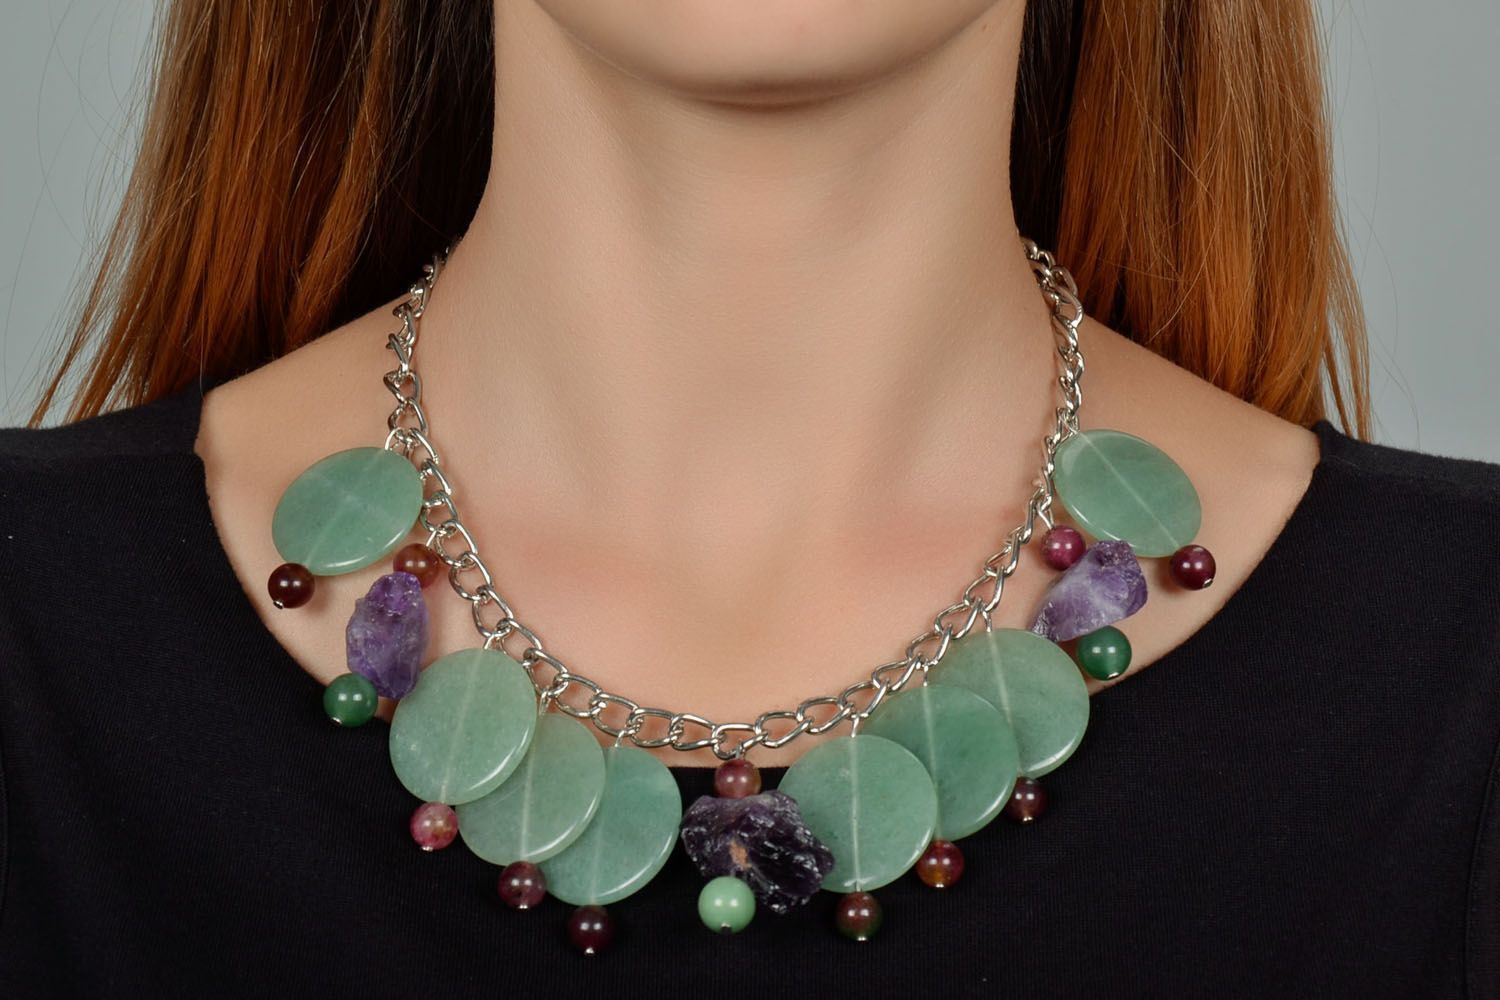 Homemade necklace with natural stones photo 1